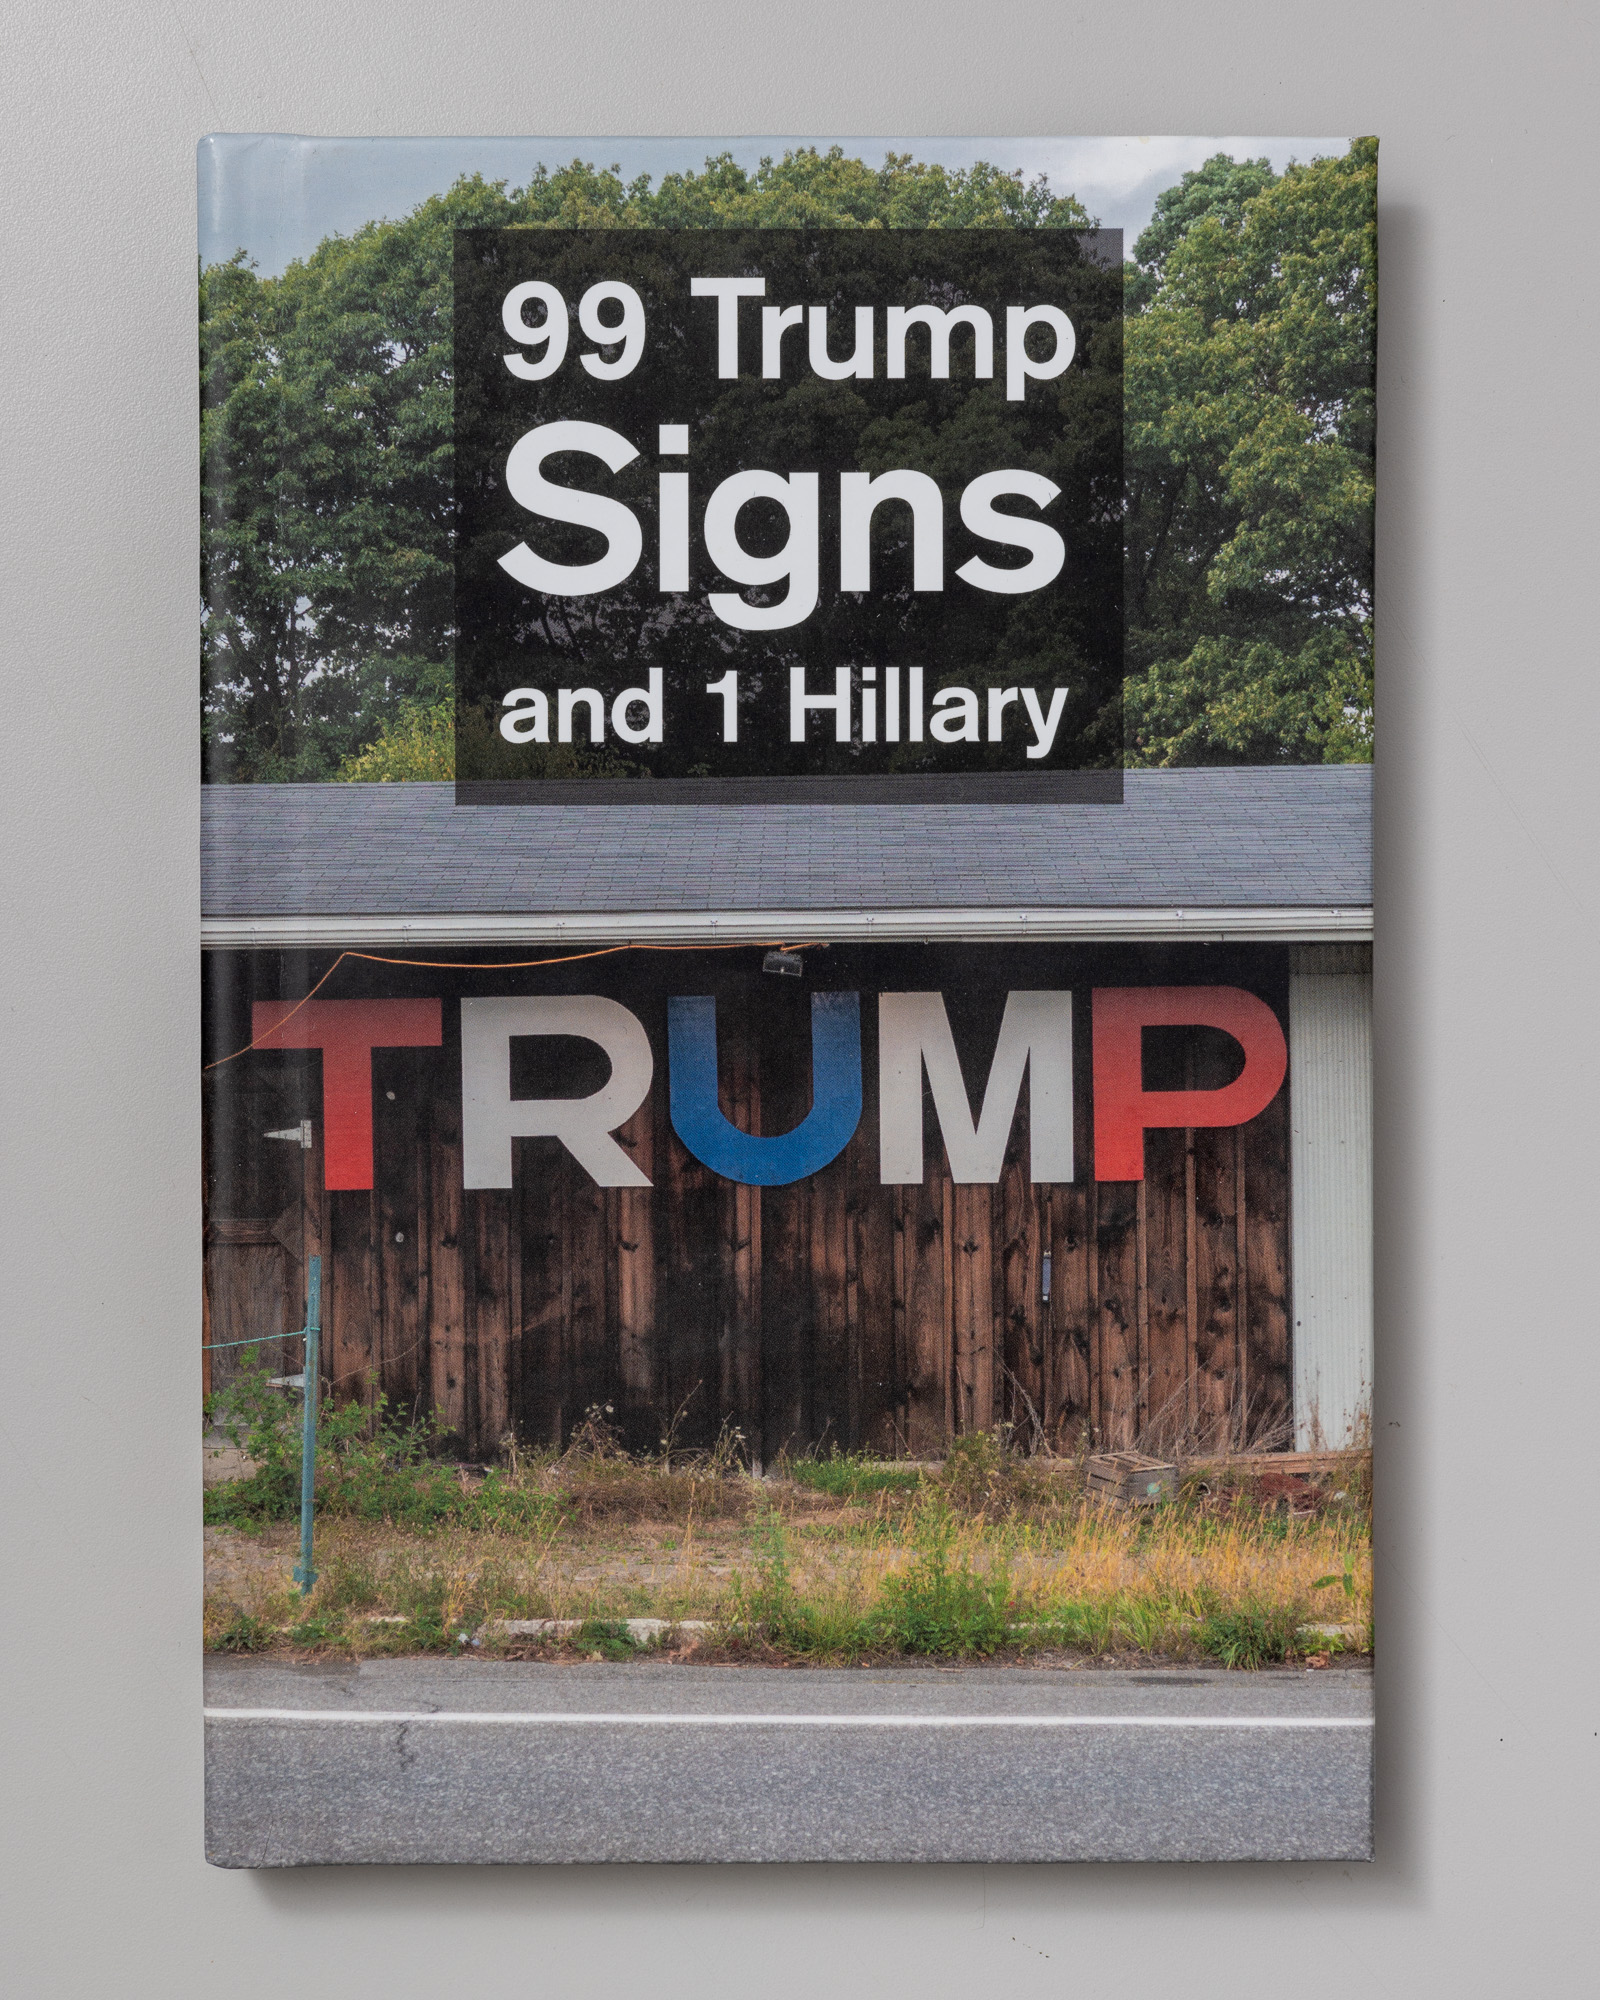 99 Trump Signs and 1 Hillary